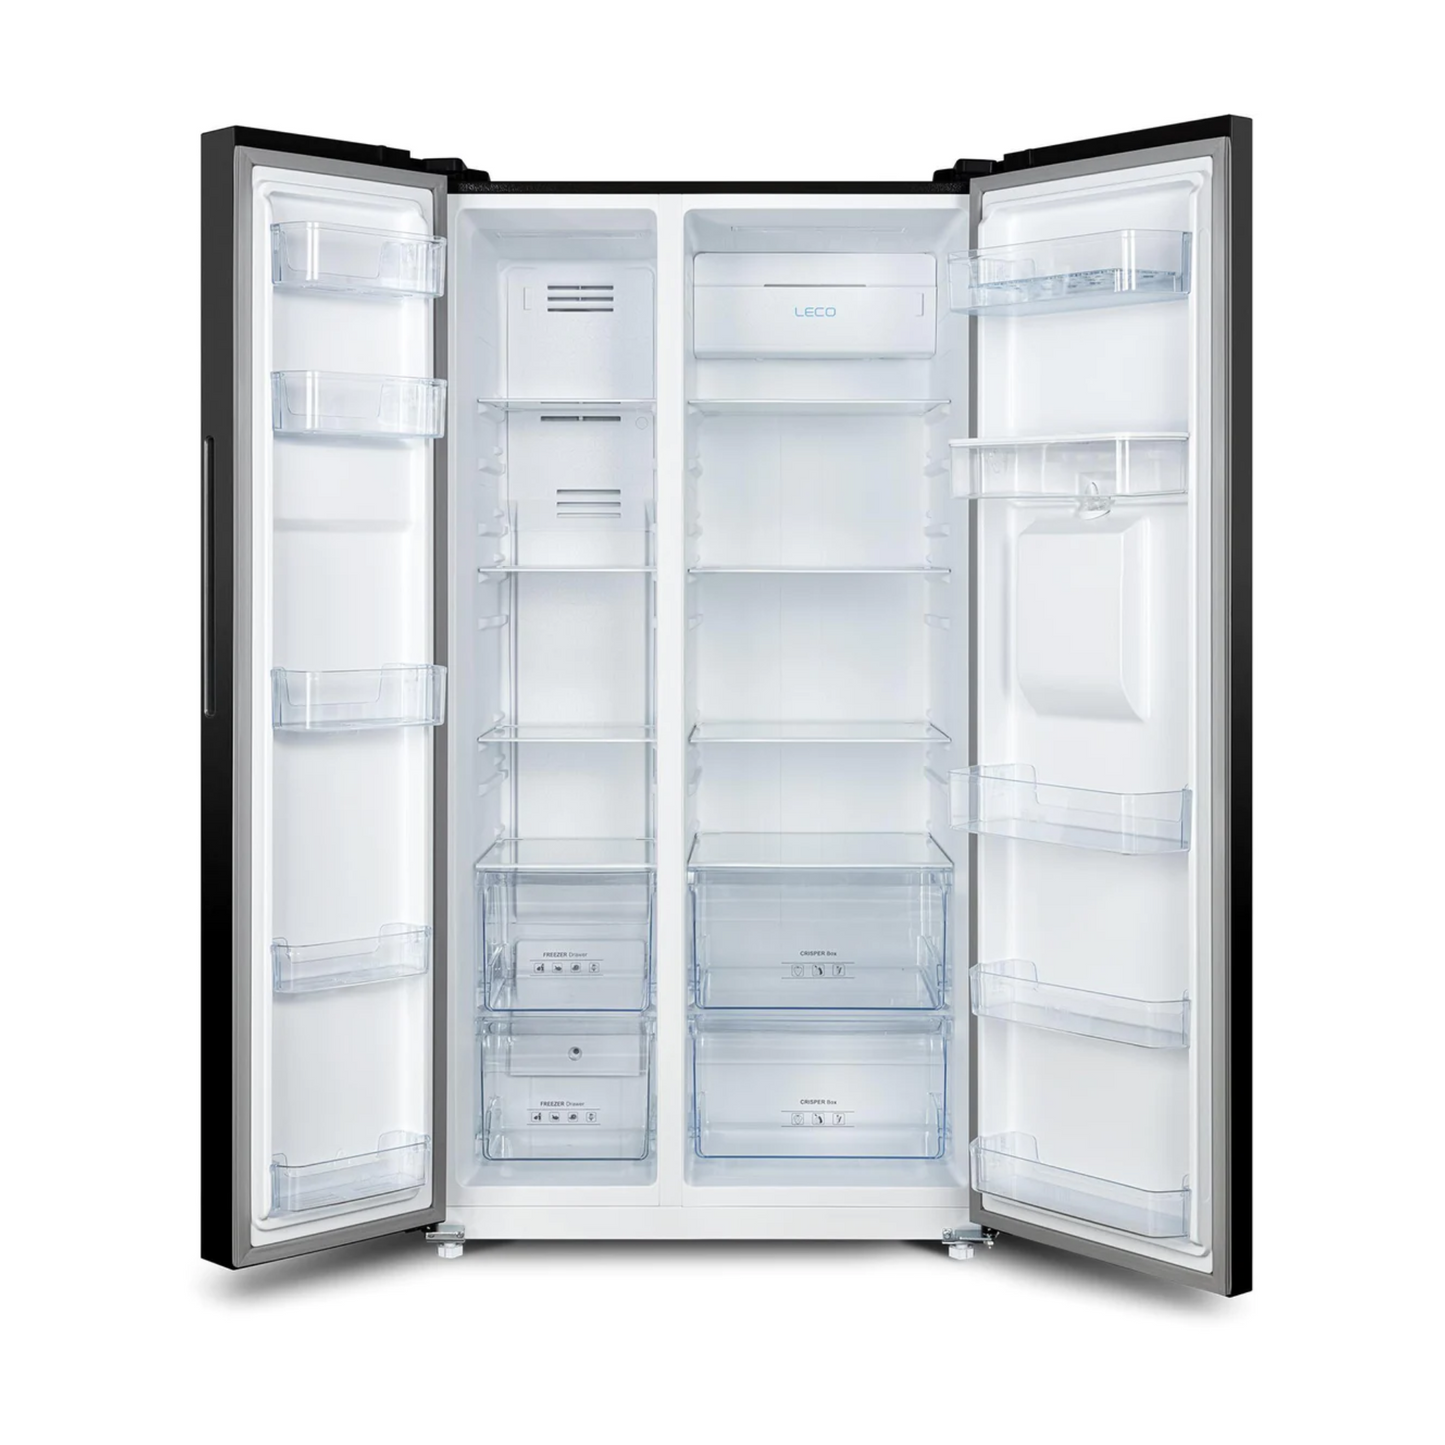 ChiQ 556L Side by Side Refrigerator, CSS556NBD